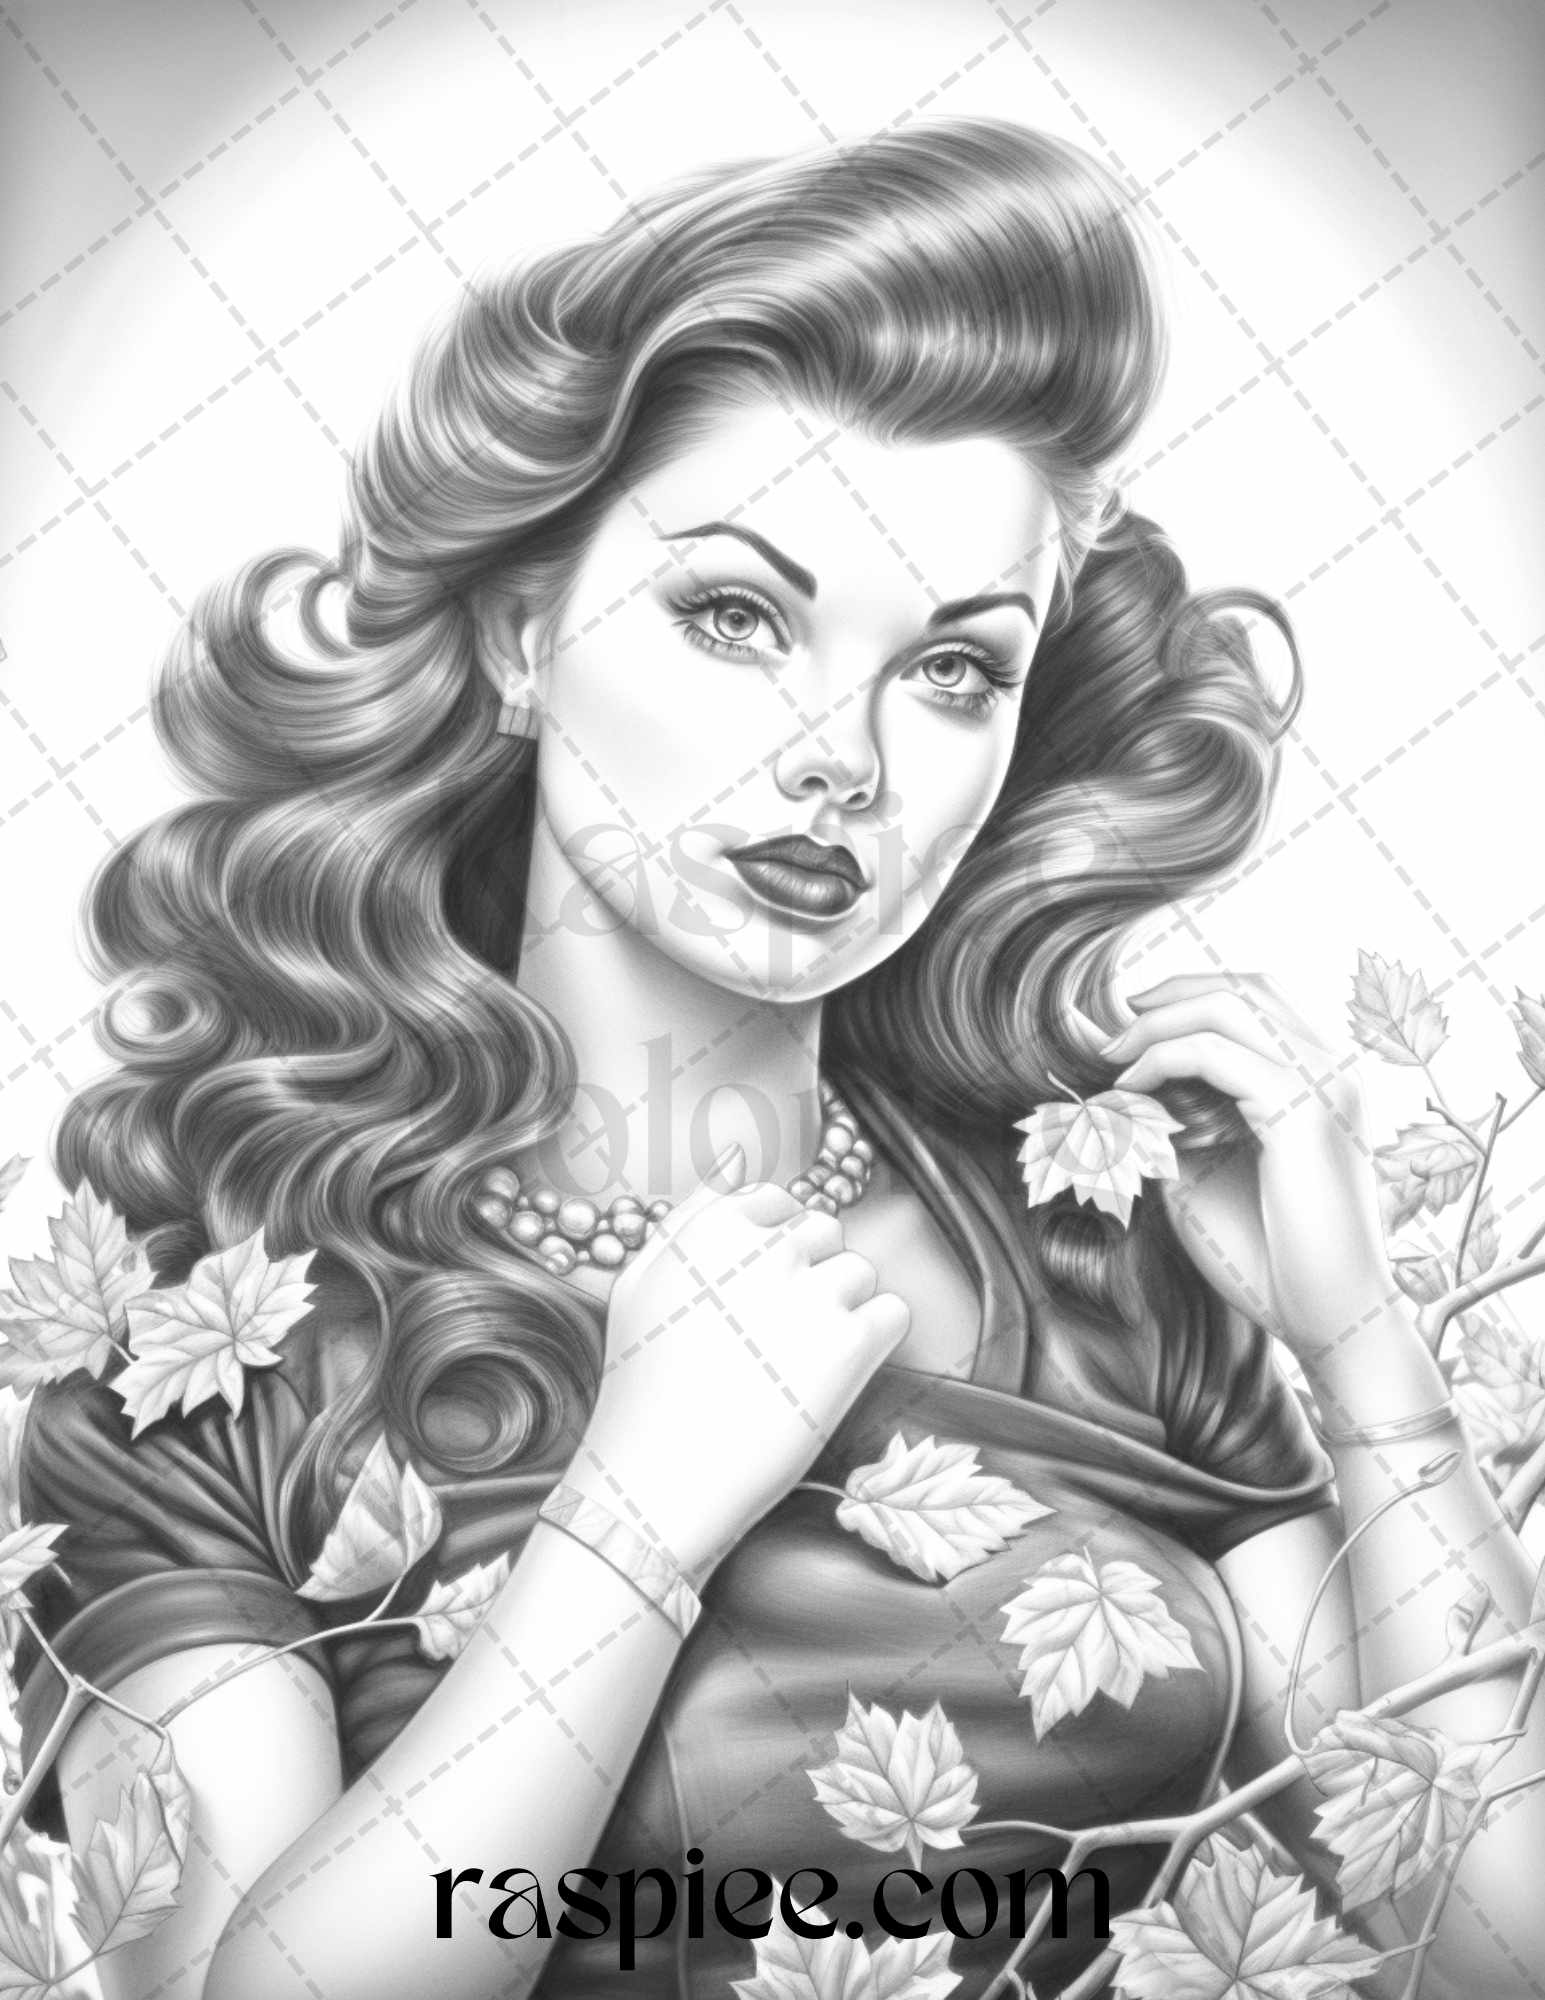 Autumn Pin Up Girls Coloring Pages, Grayscale Adult Coloring Sheets, Vintage Pinup Art for Printing, Coloring Book for Grownups, Digital Download Coloring, Autumn Coloring Therapy, High-Quality Coloring Images, Autumn Coloring Pages for Adults, Portrait Coloring Pages for Adults, Vintage Coloring Pages